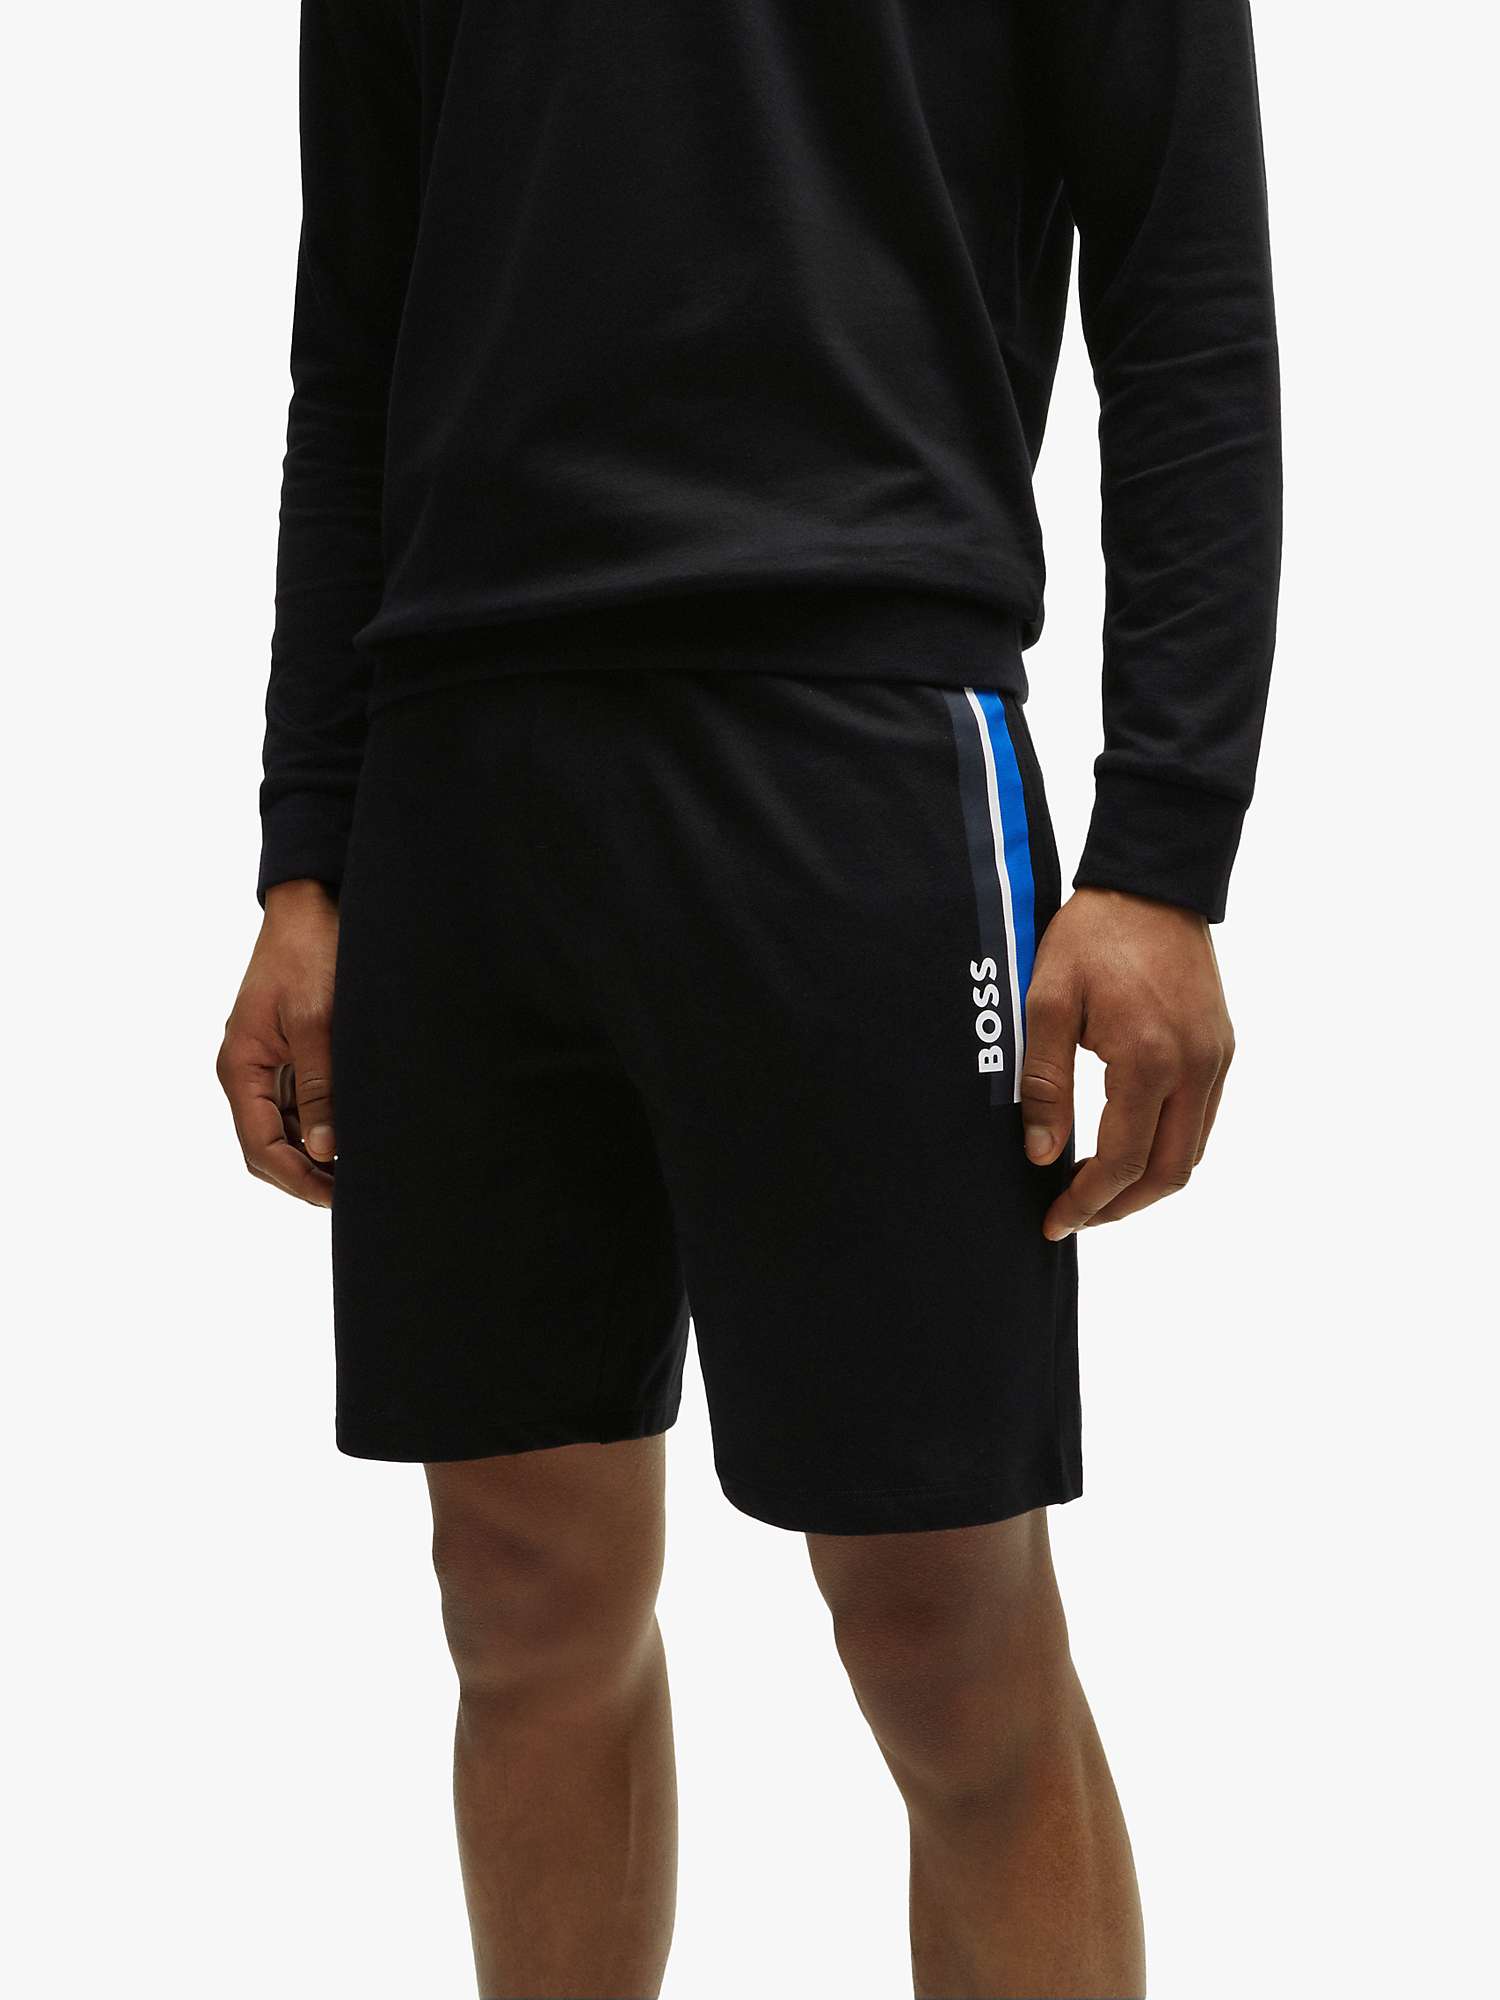 Buy BOSS Authentic Shorts, Black Online at johnlewis.com